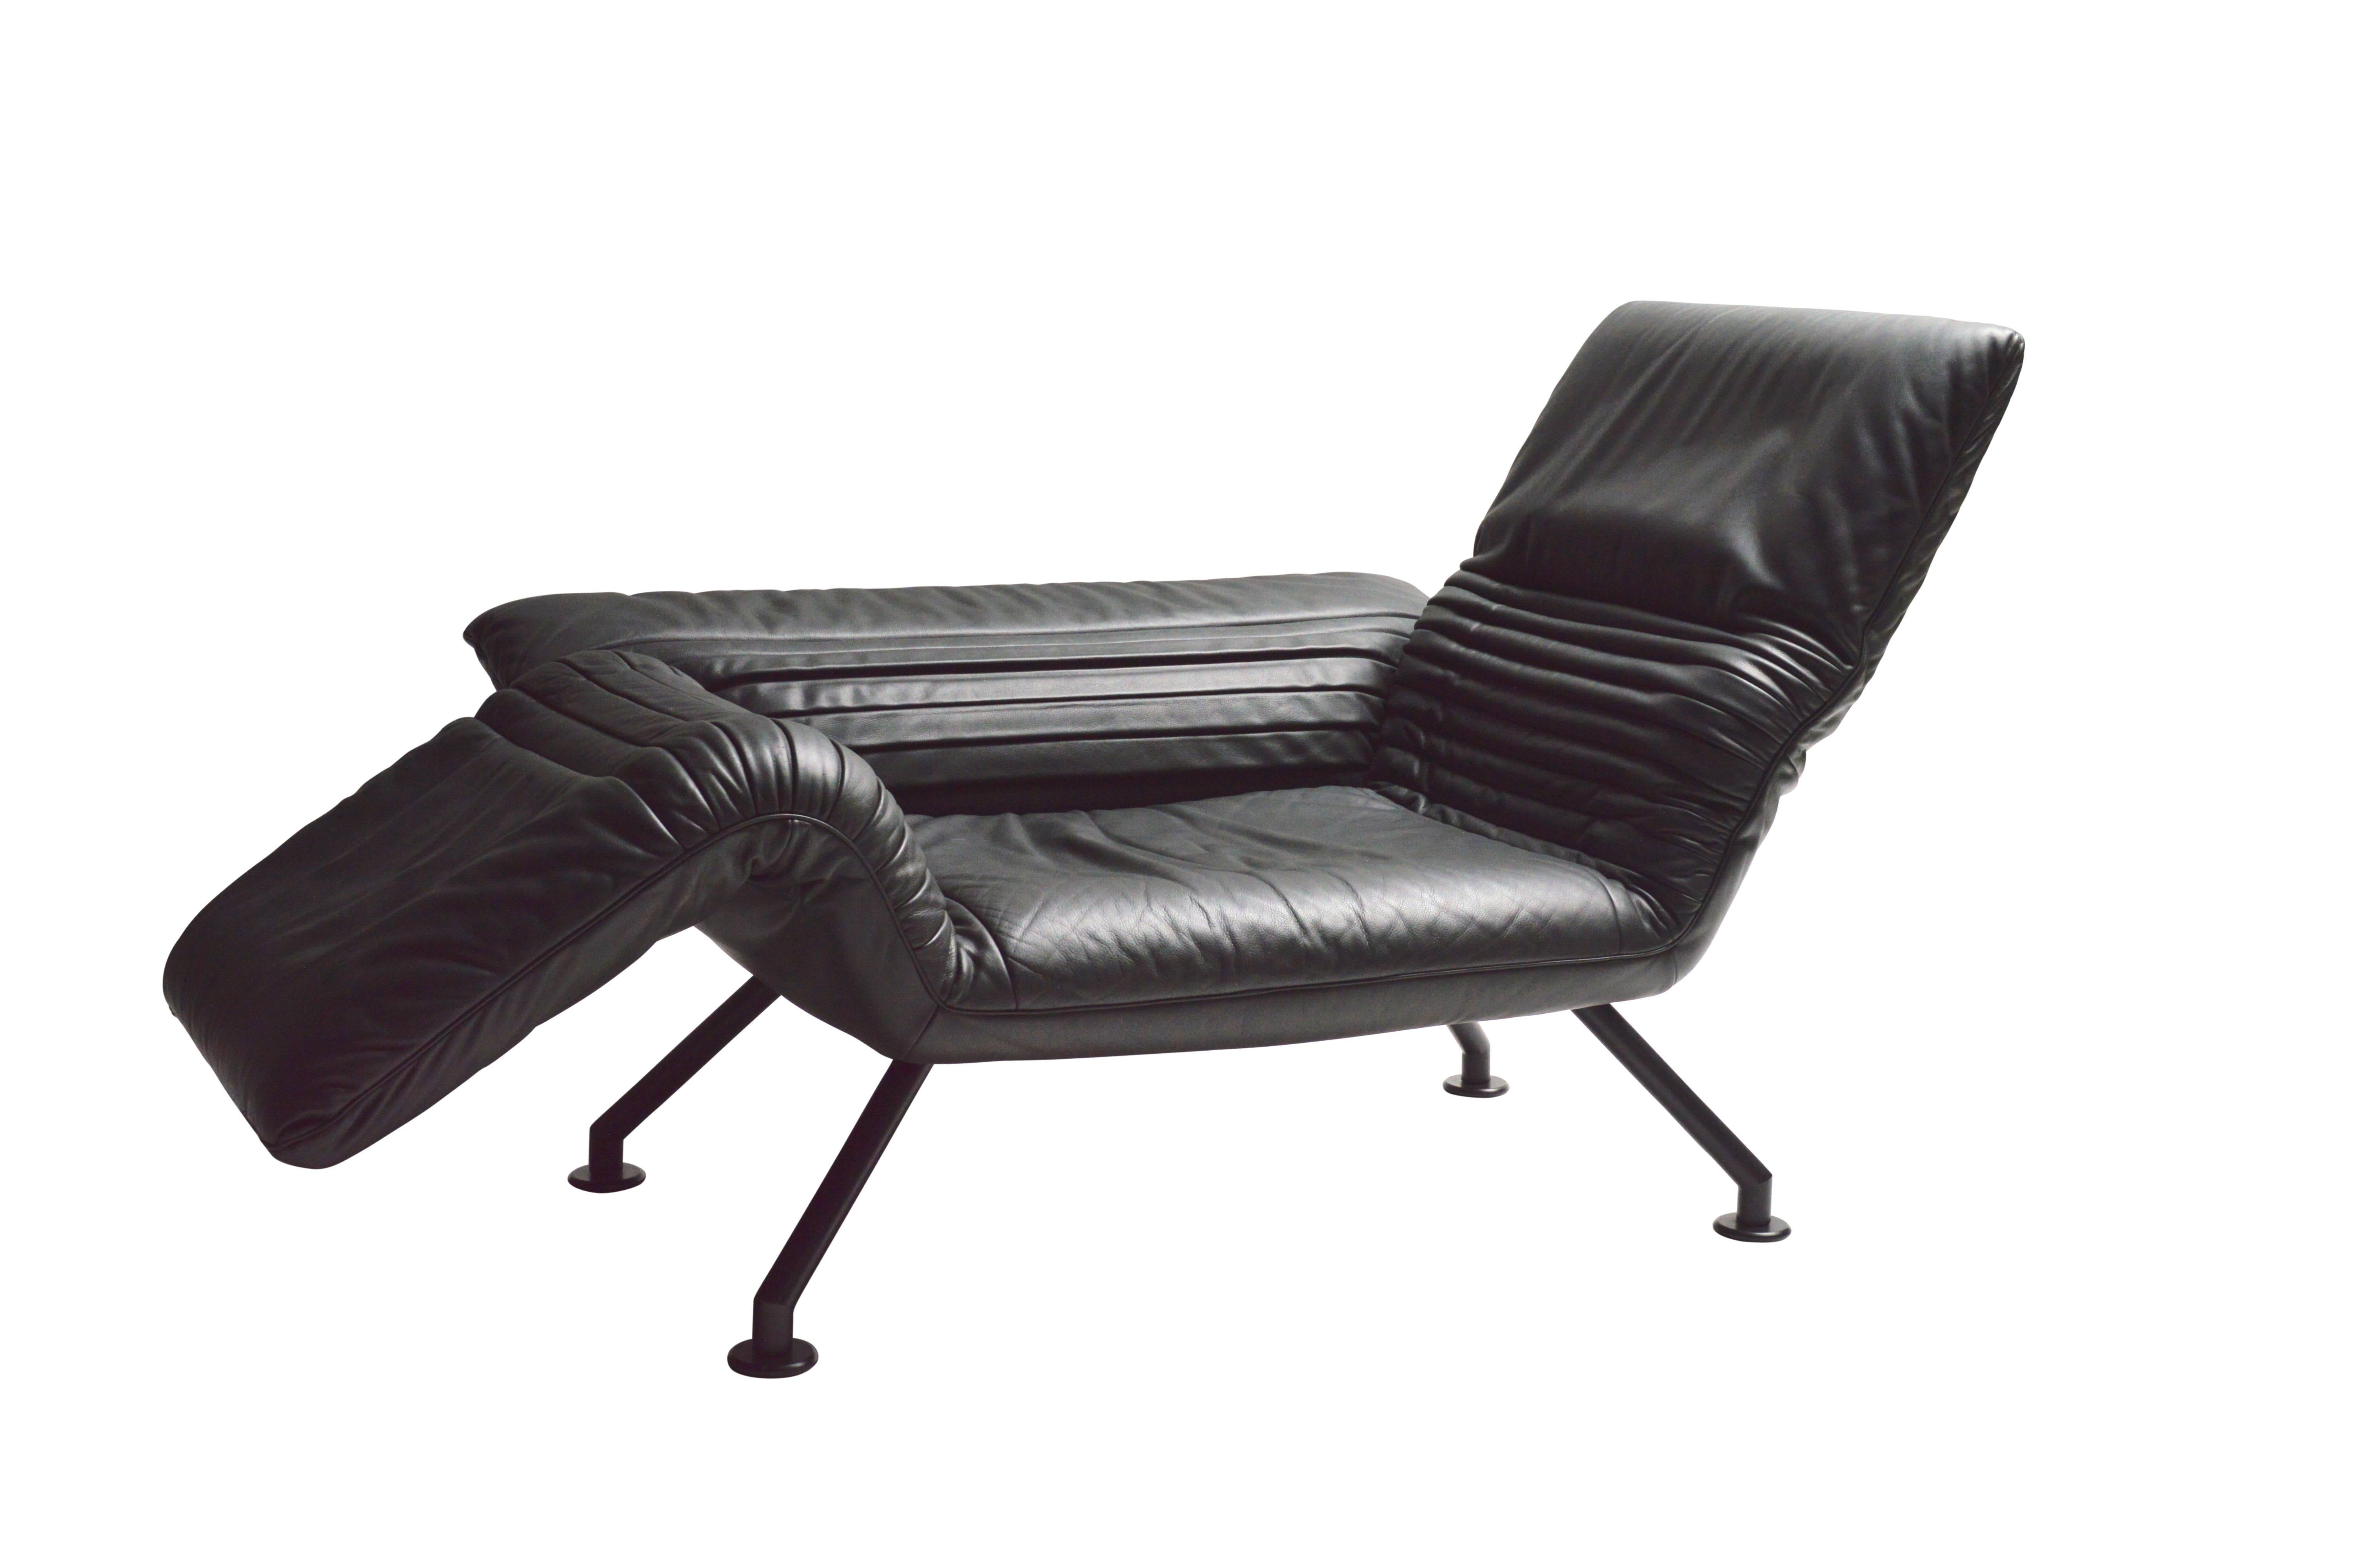 Excellent set of leather lounge chairs on sturdy iron legs by Swiss manufacturer De Sede. Both arms and the back can be moved up and down for a multitude of positions. It can be arranged as a settee or reclining lounge chair. Leather is an elephant